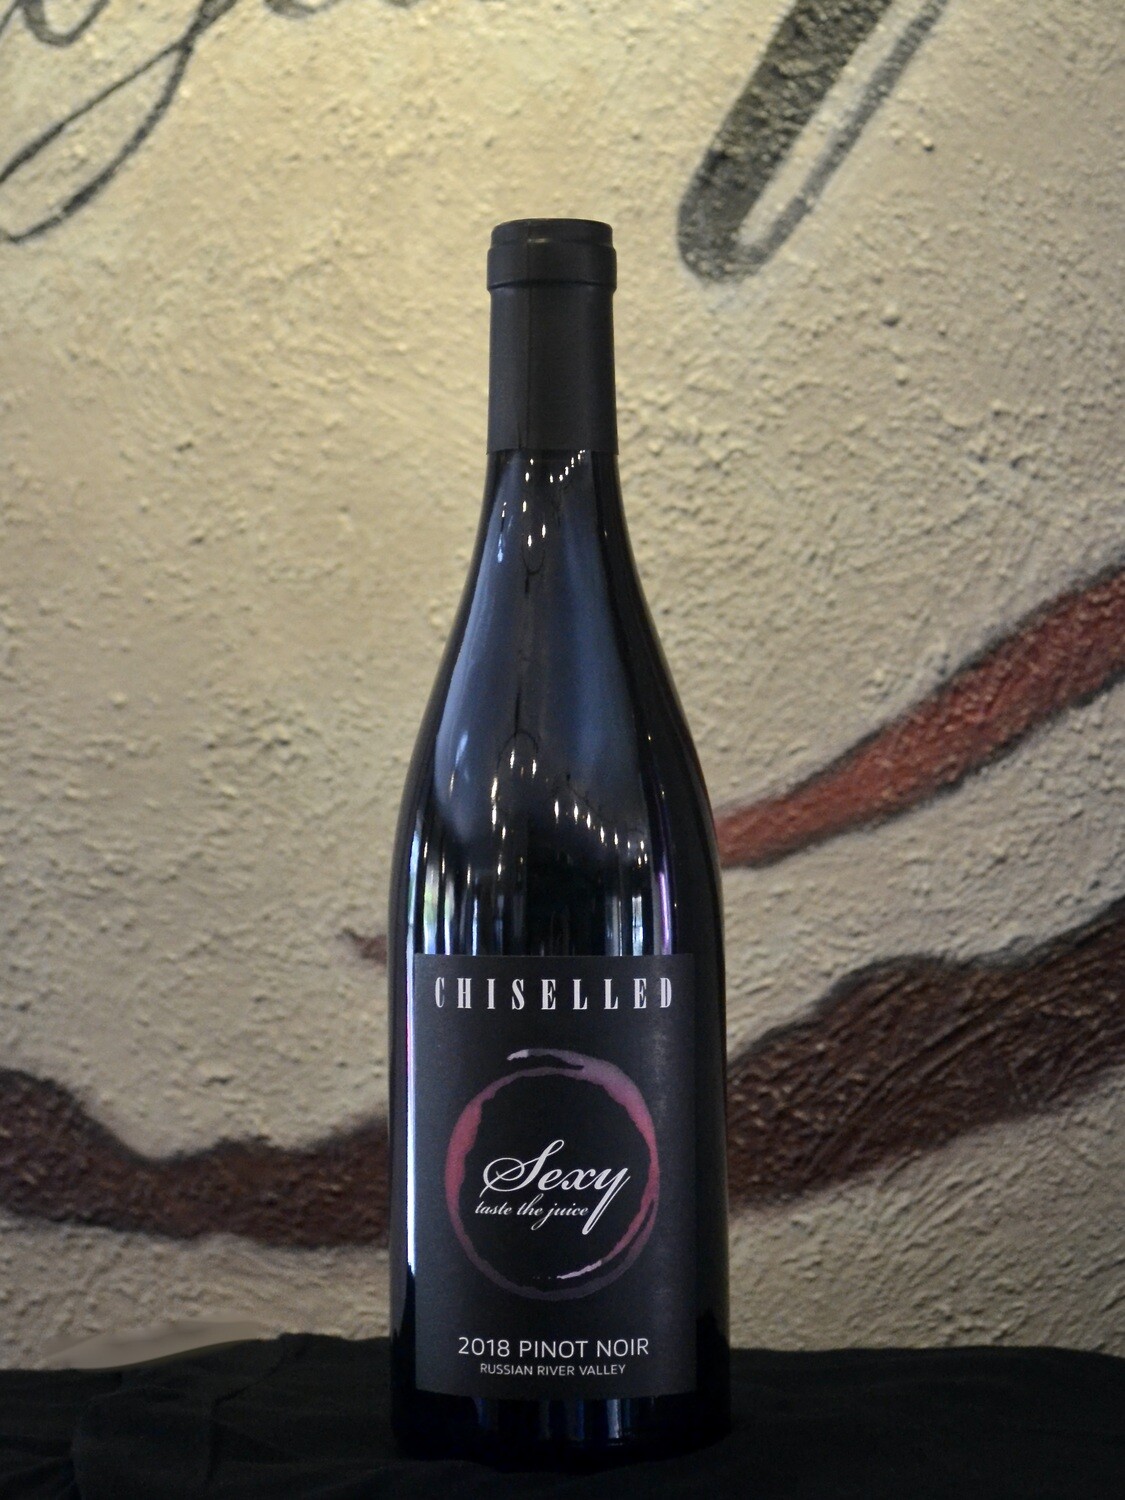 Sexy Select 2018 Russian River Valley Pinot Noir